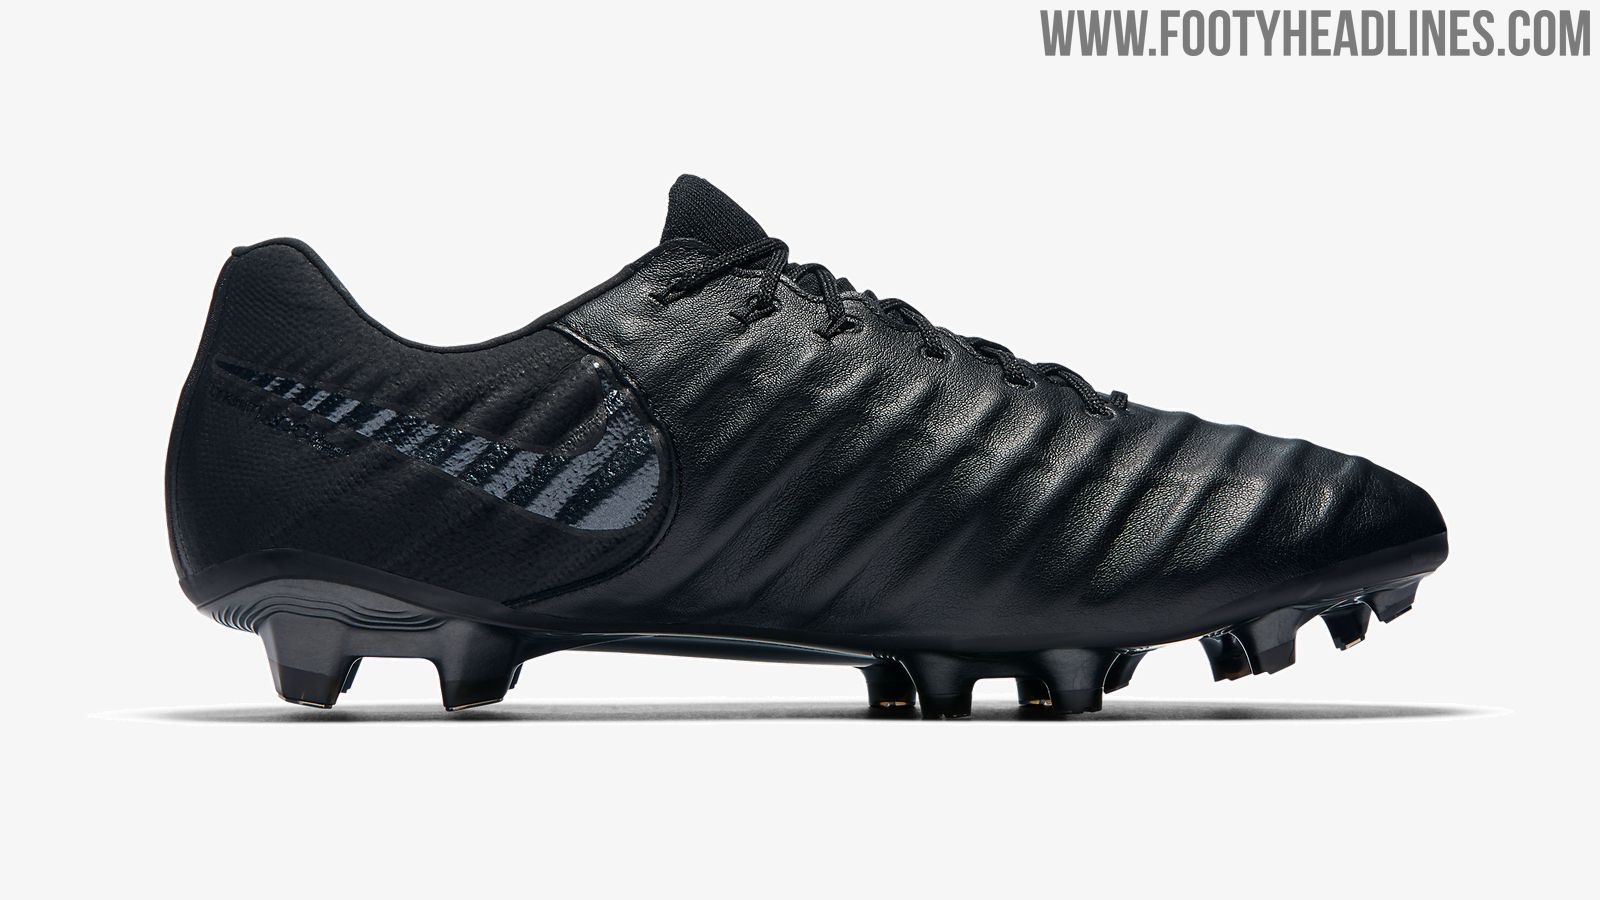 Blackout Legend VII Stealth Ops Boots Released Footy Headlines